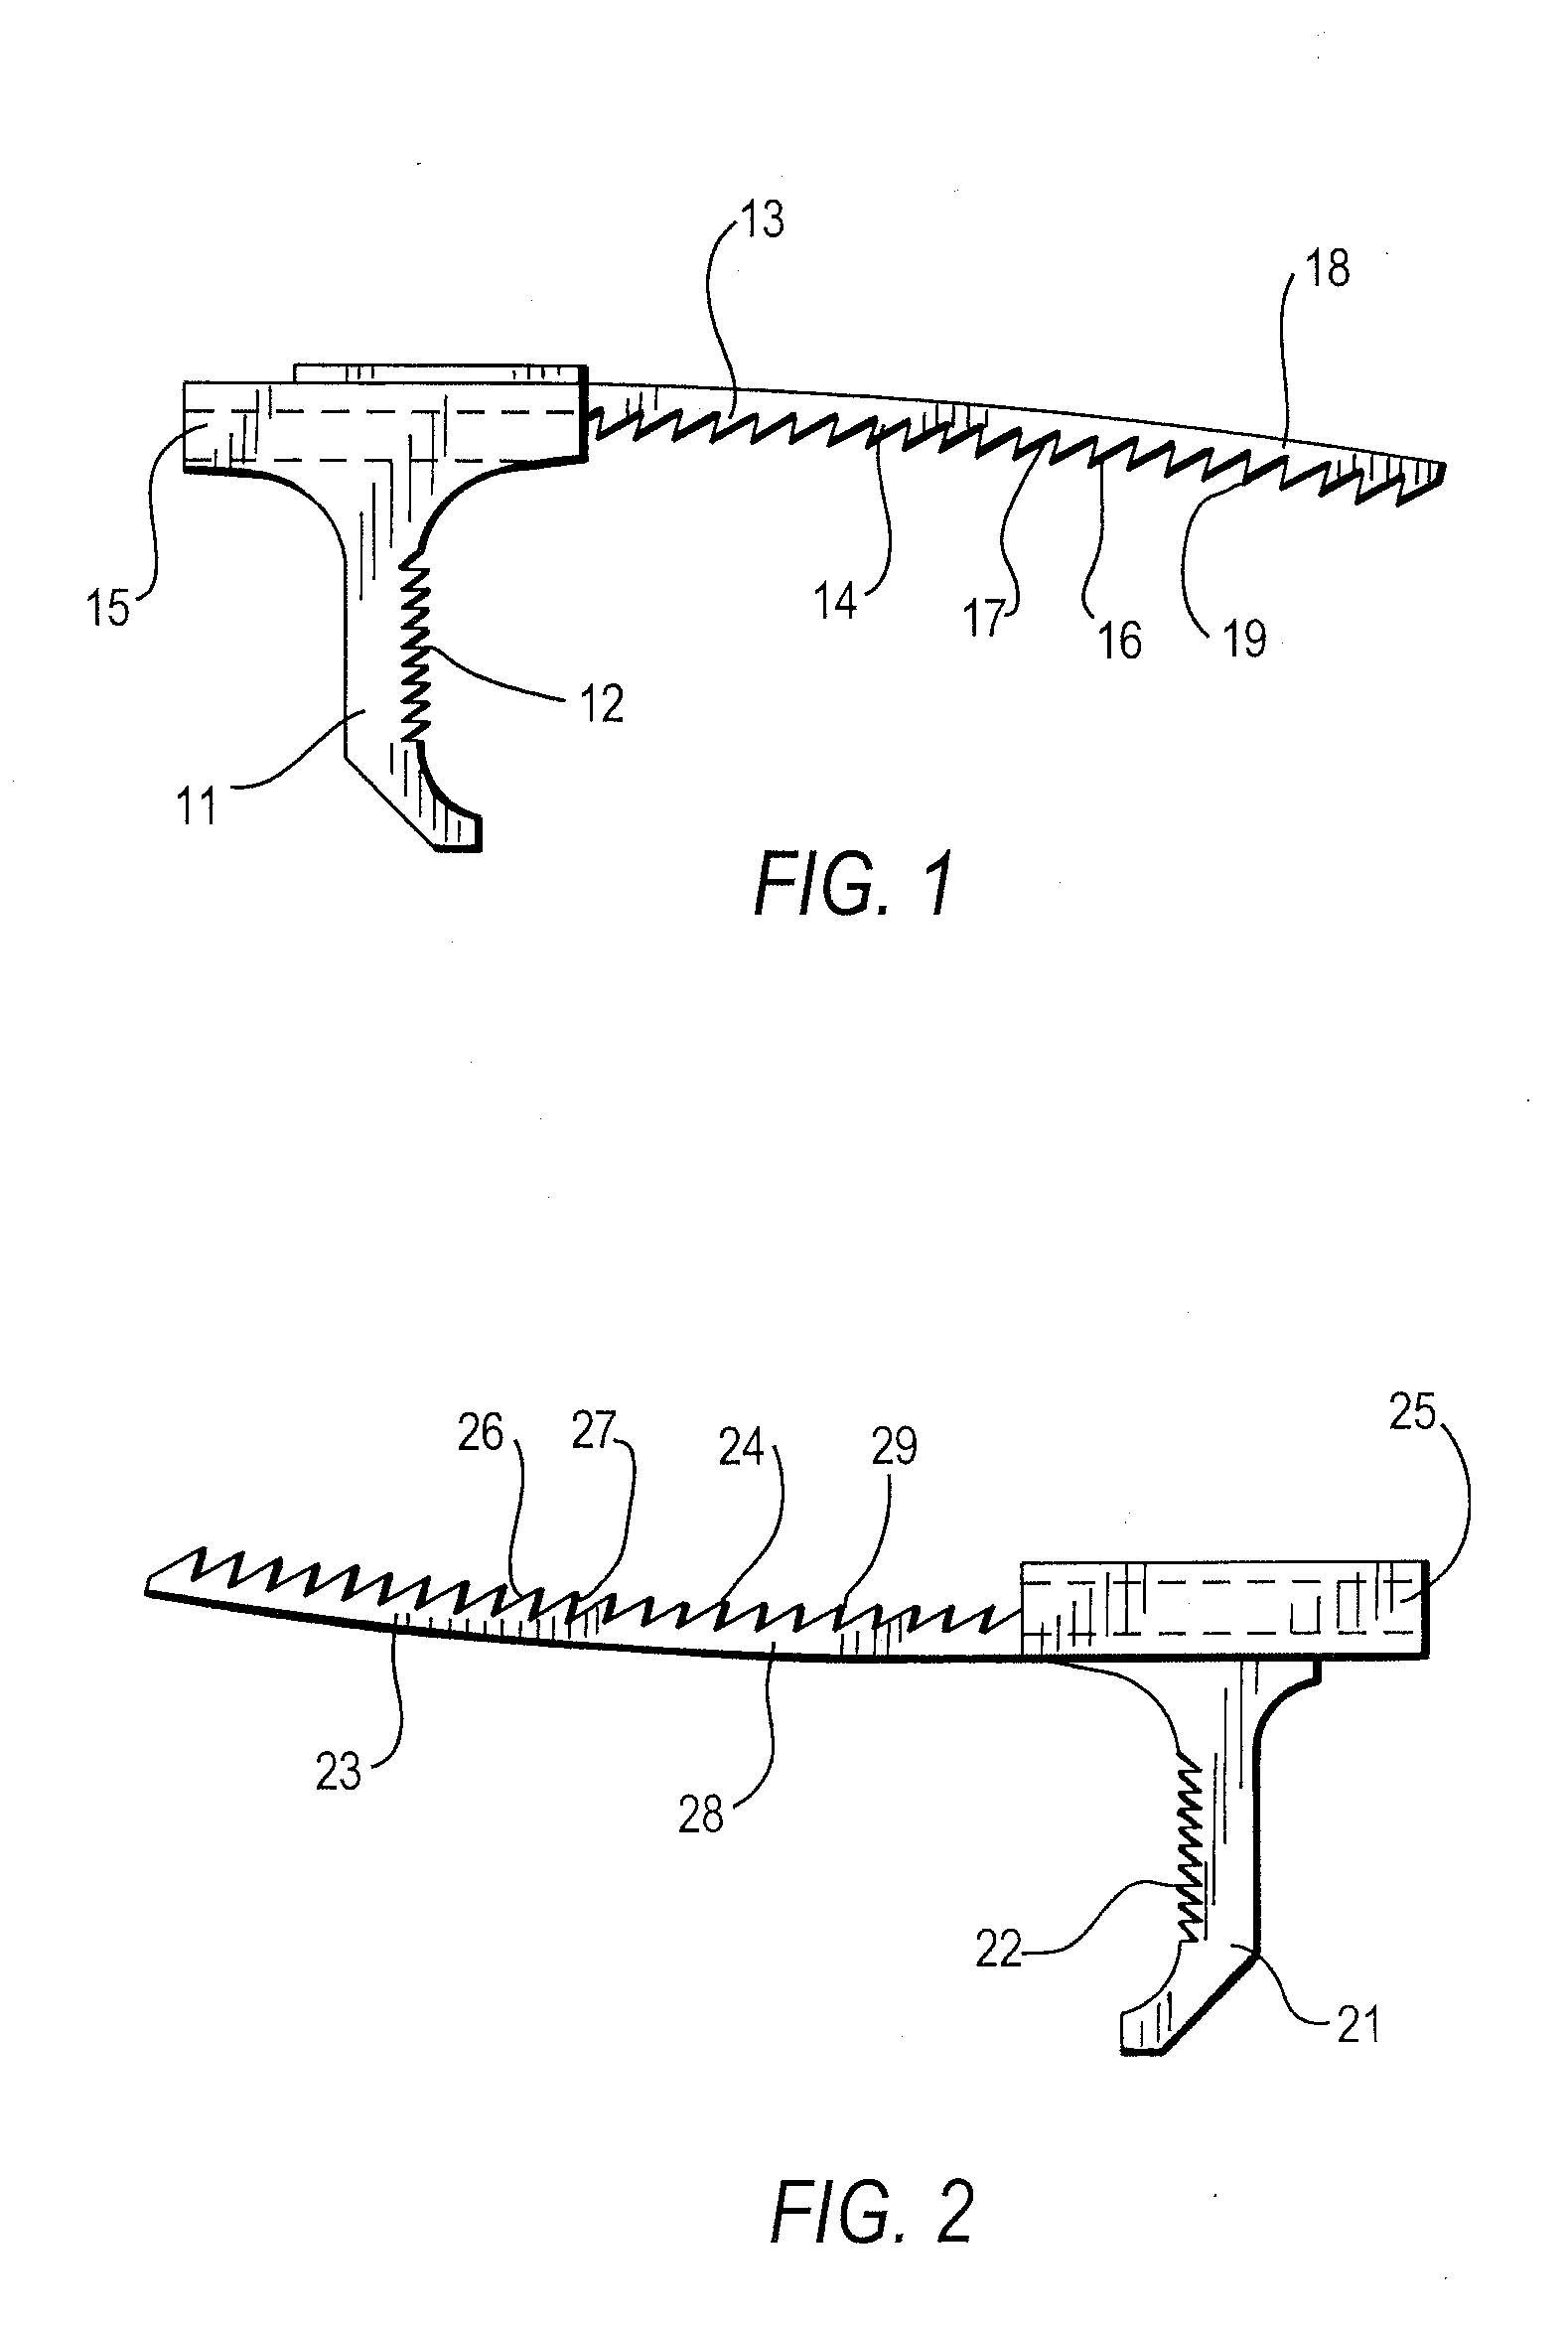 Method and apparatus for surgical clamping